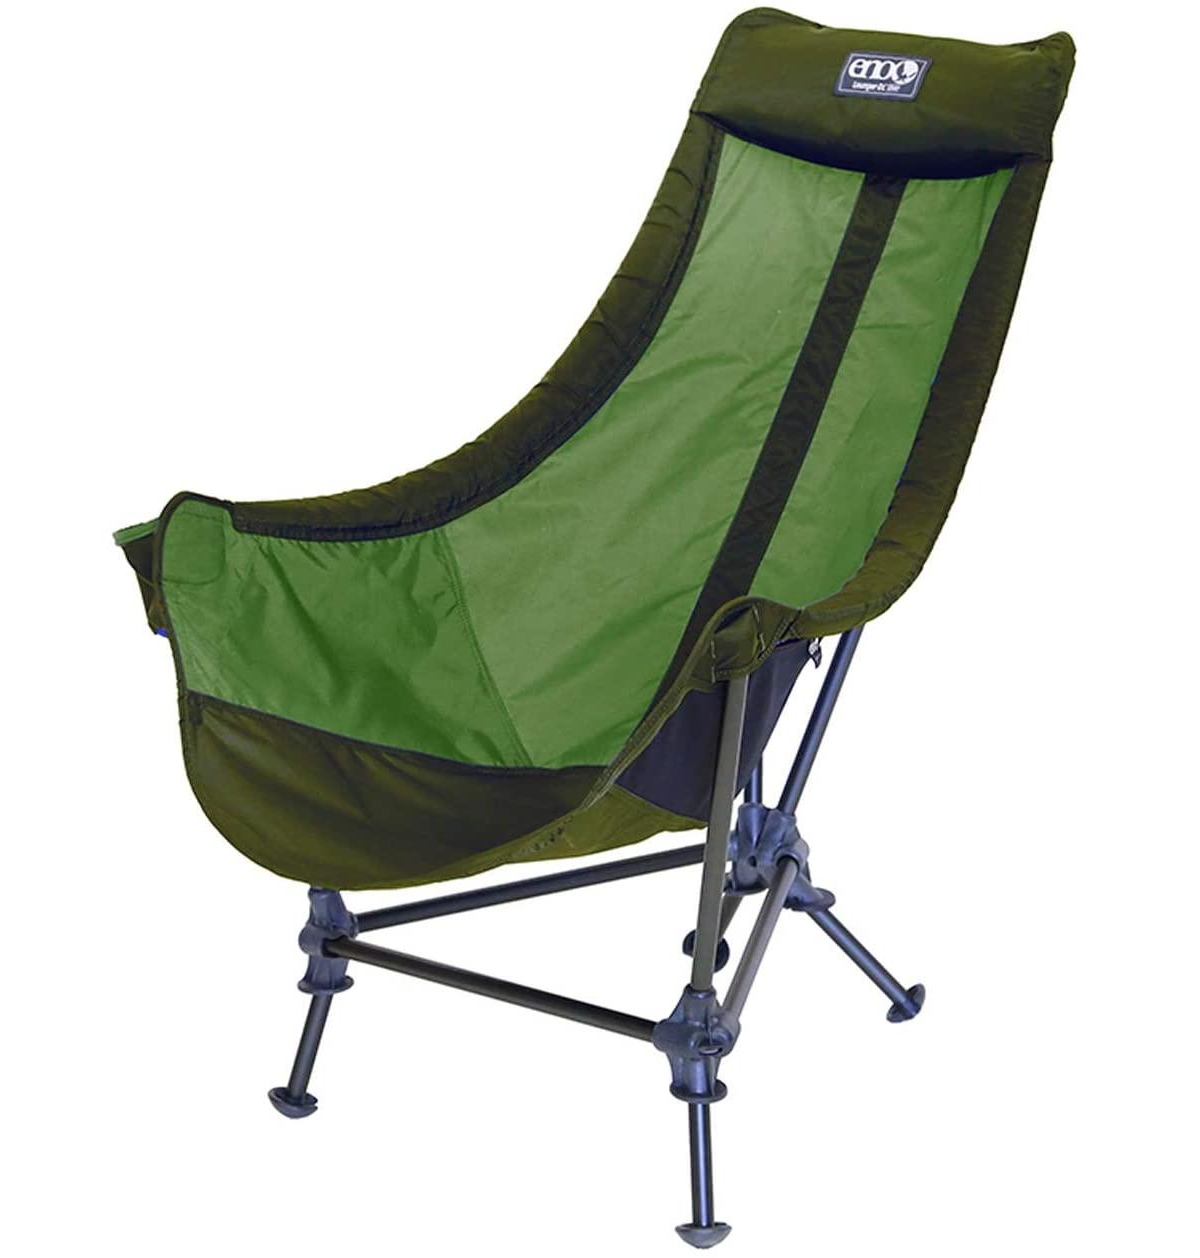 Lounger Dl Chair - Portable Outdoor Hiking, Backpacking, Beach, Camping, and Festival Chair - Olive/Lime - Olive/Lime